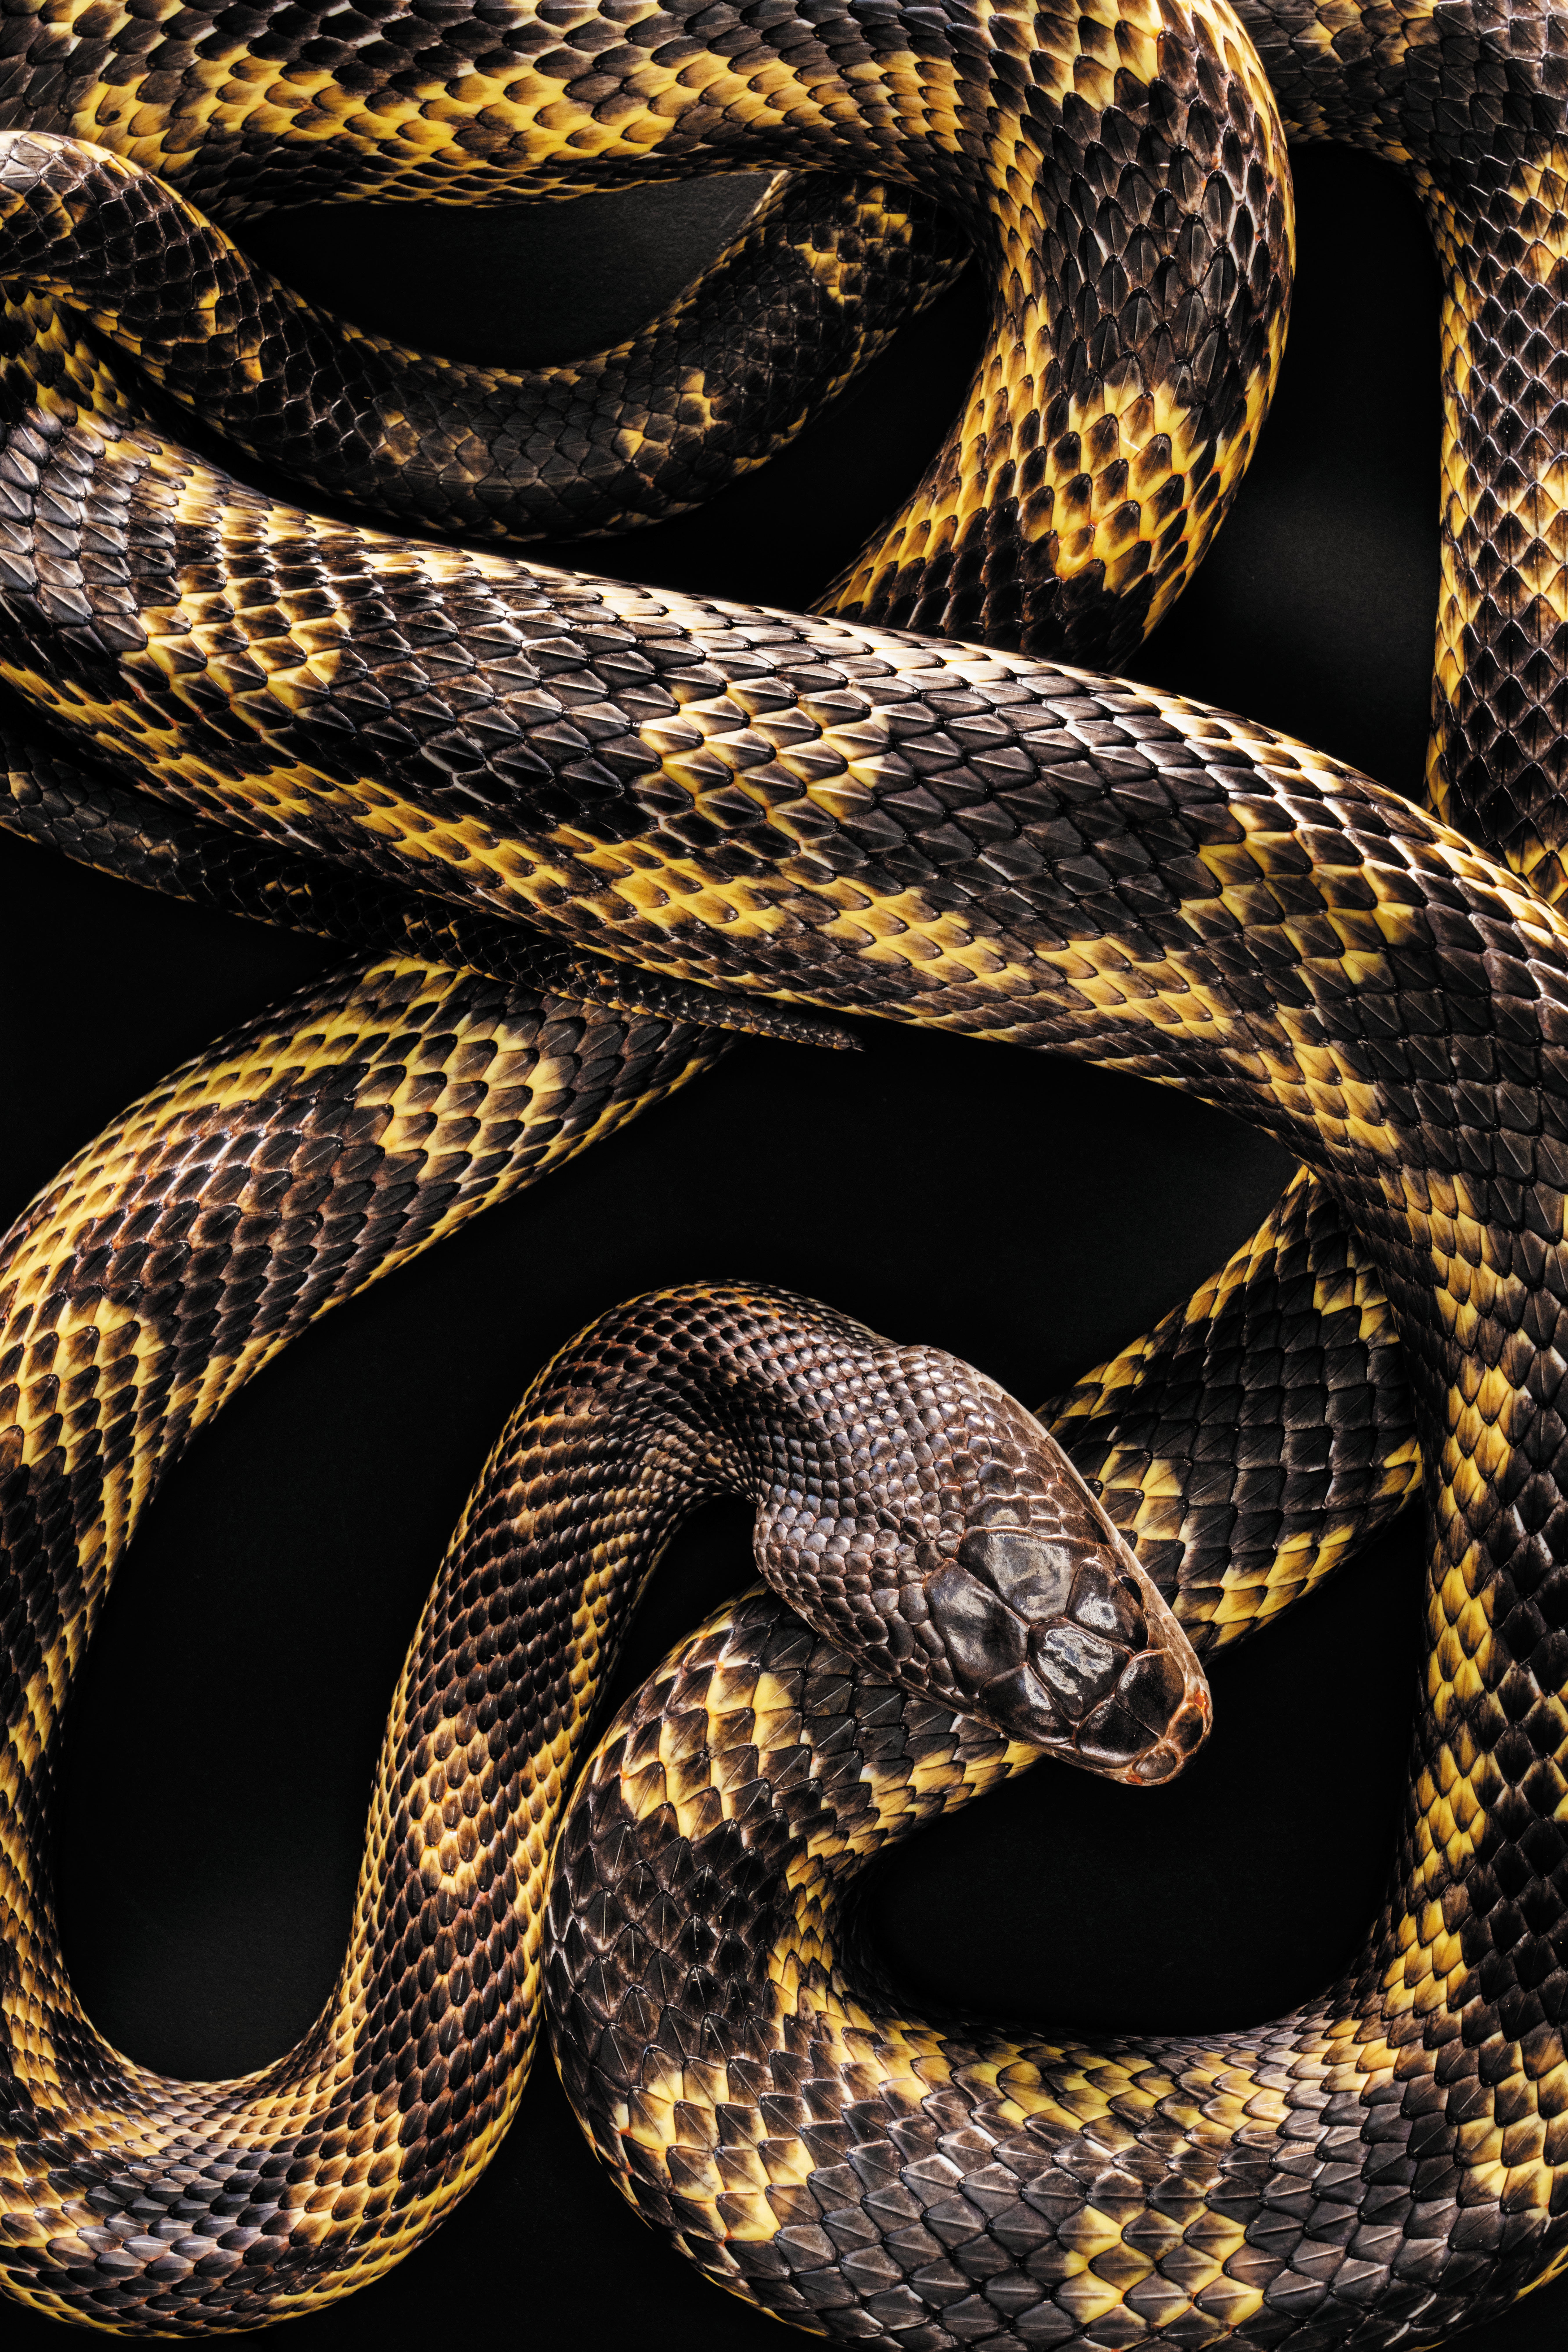 Yellow-and-black-striped snake shown at medium distance. with coils and folds of the body shown against a black backdrop.